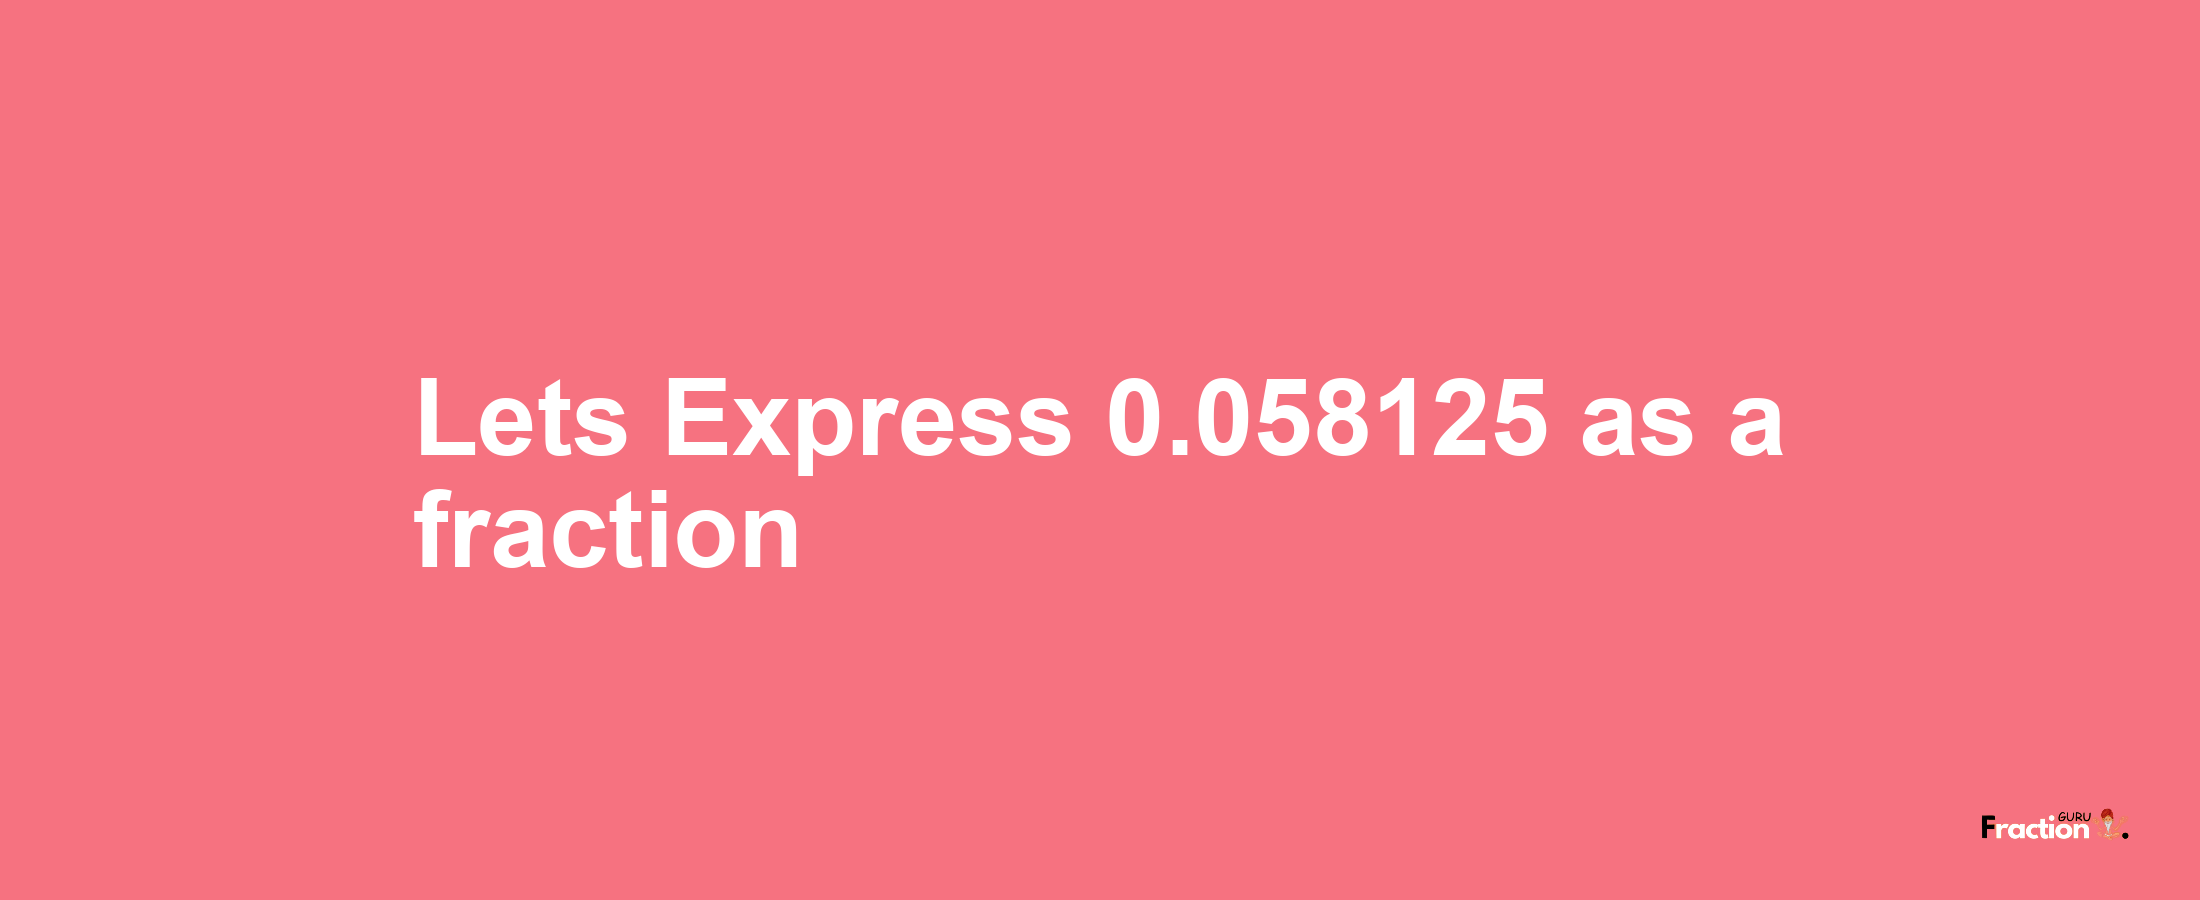 Lets Express 0.058125 as afraction